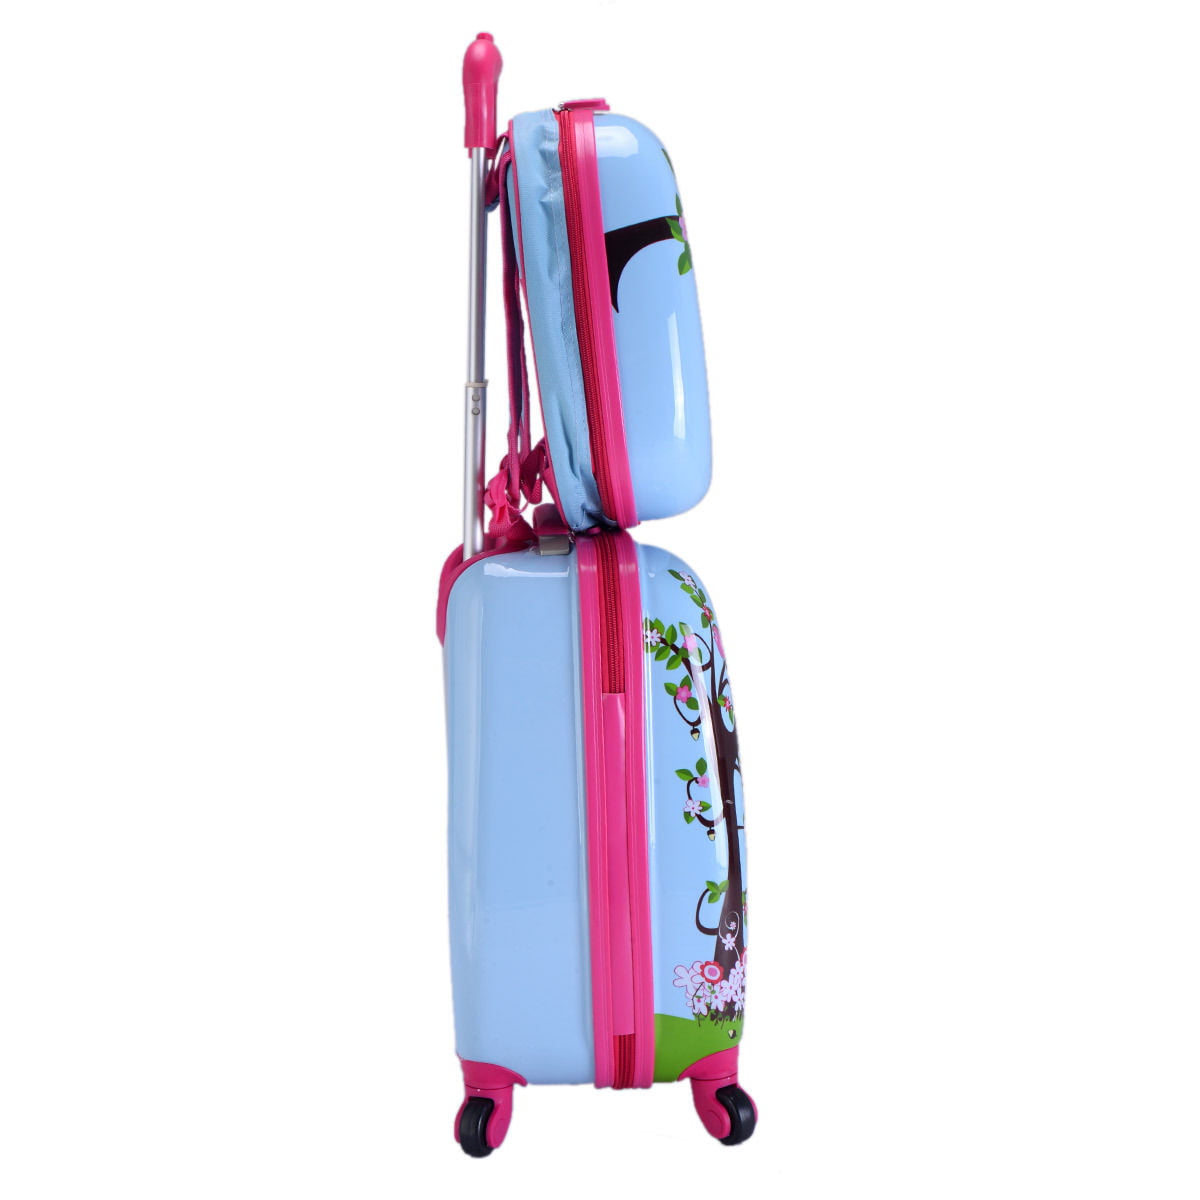 Carry On Luggage With Wheels Kids Rolling Suitcase Backpack 2Pc Cute Travel Set | eBay